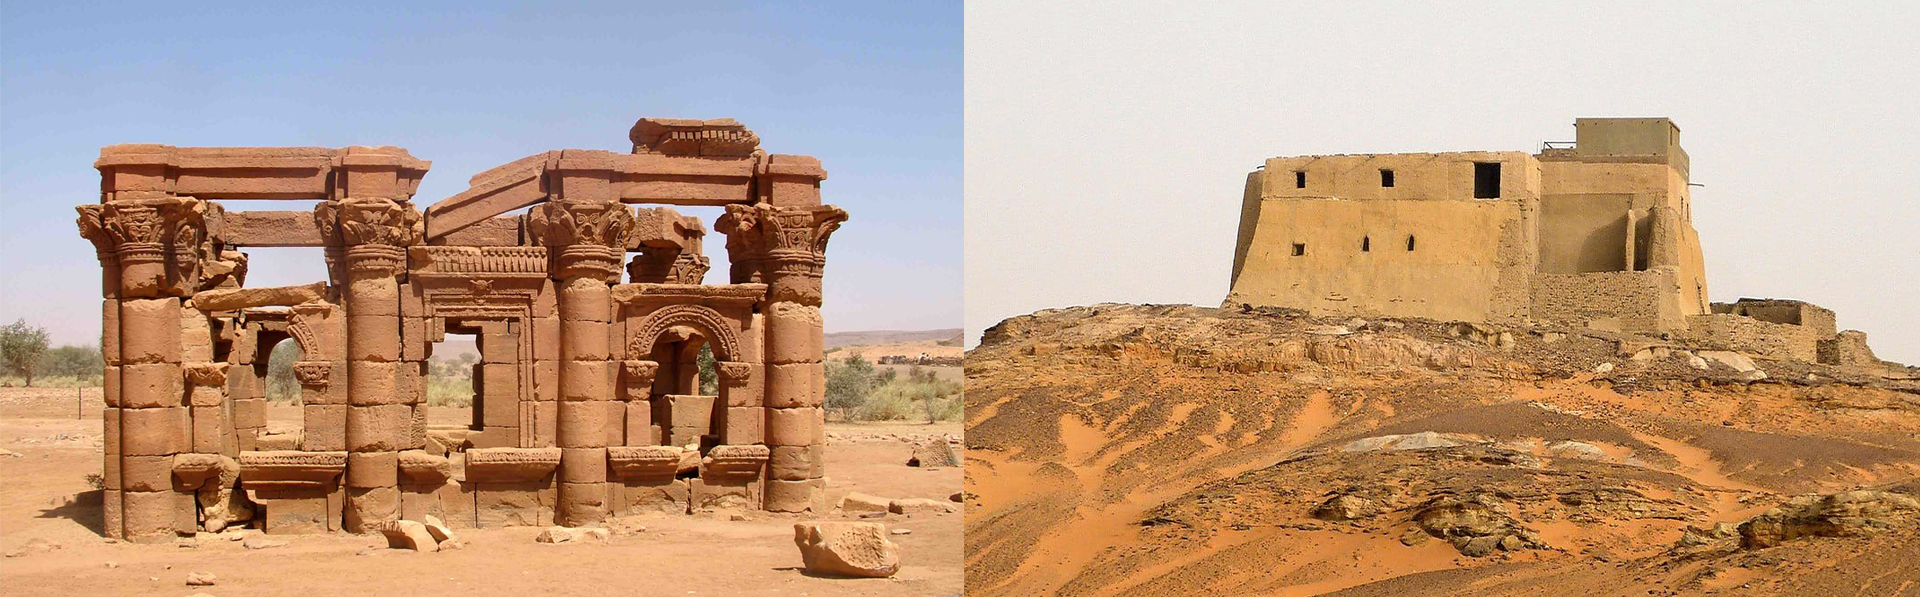 Attention to the Sudanese religious heritage